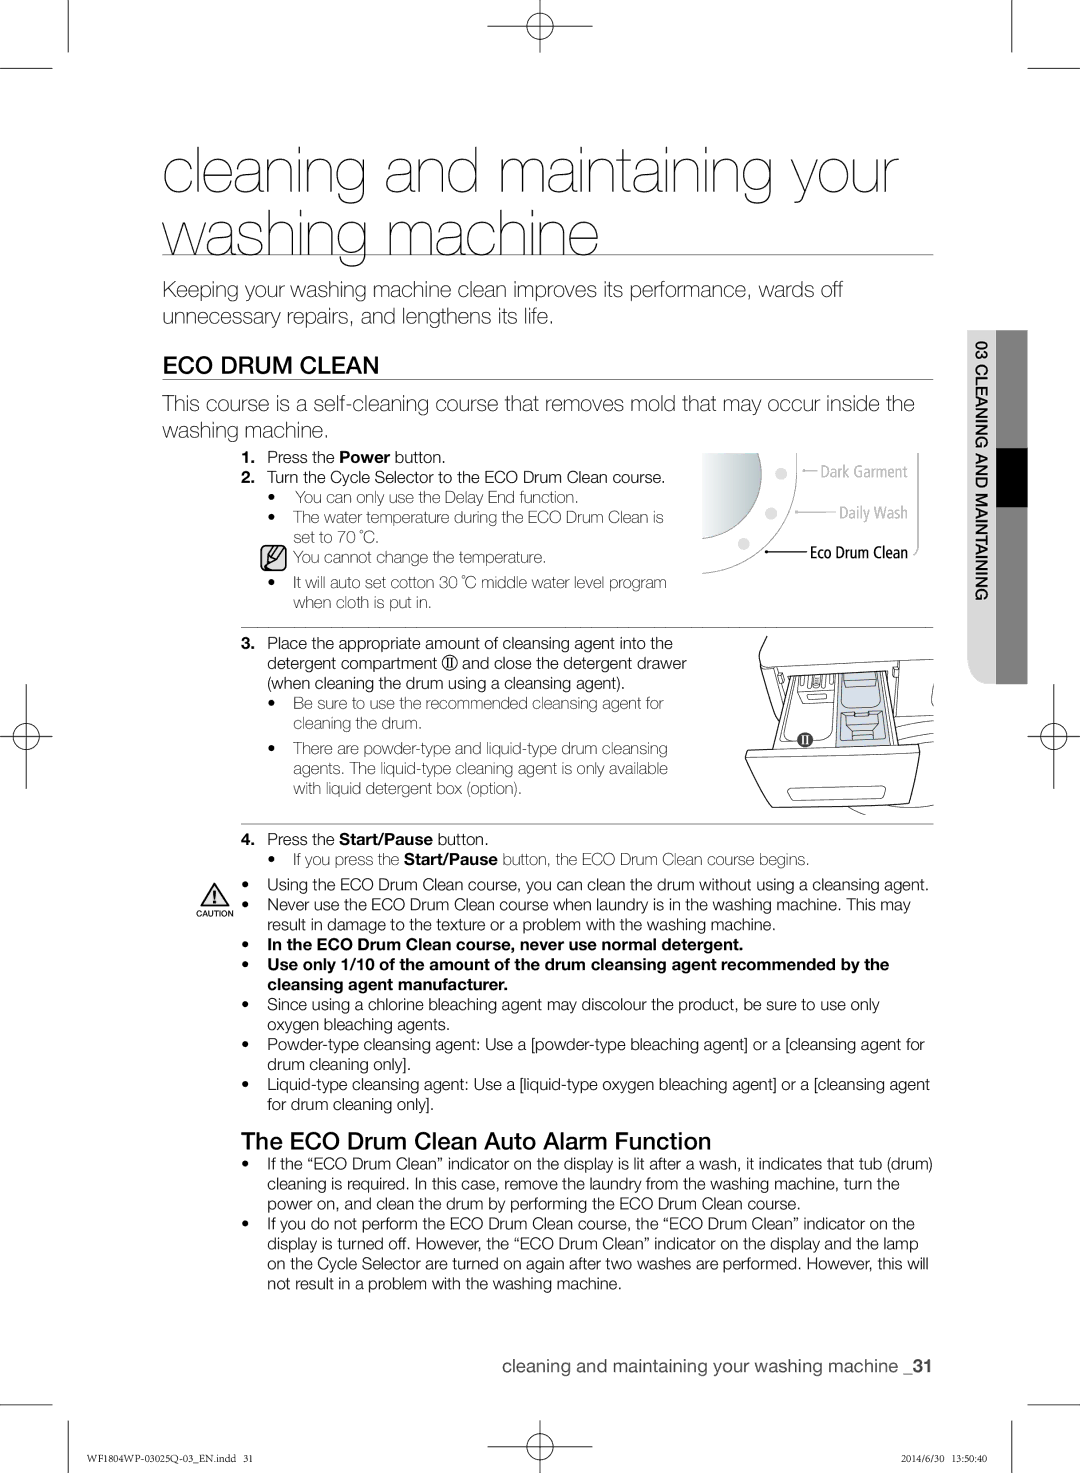 Samsung WF1802WPU/XSG manual Cleaning and maintaining your washing machine, ECO Drum Clean Auto Alarm Function 